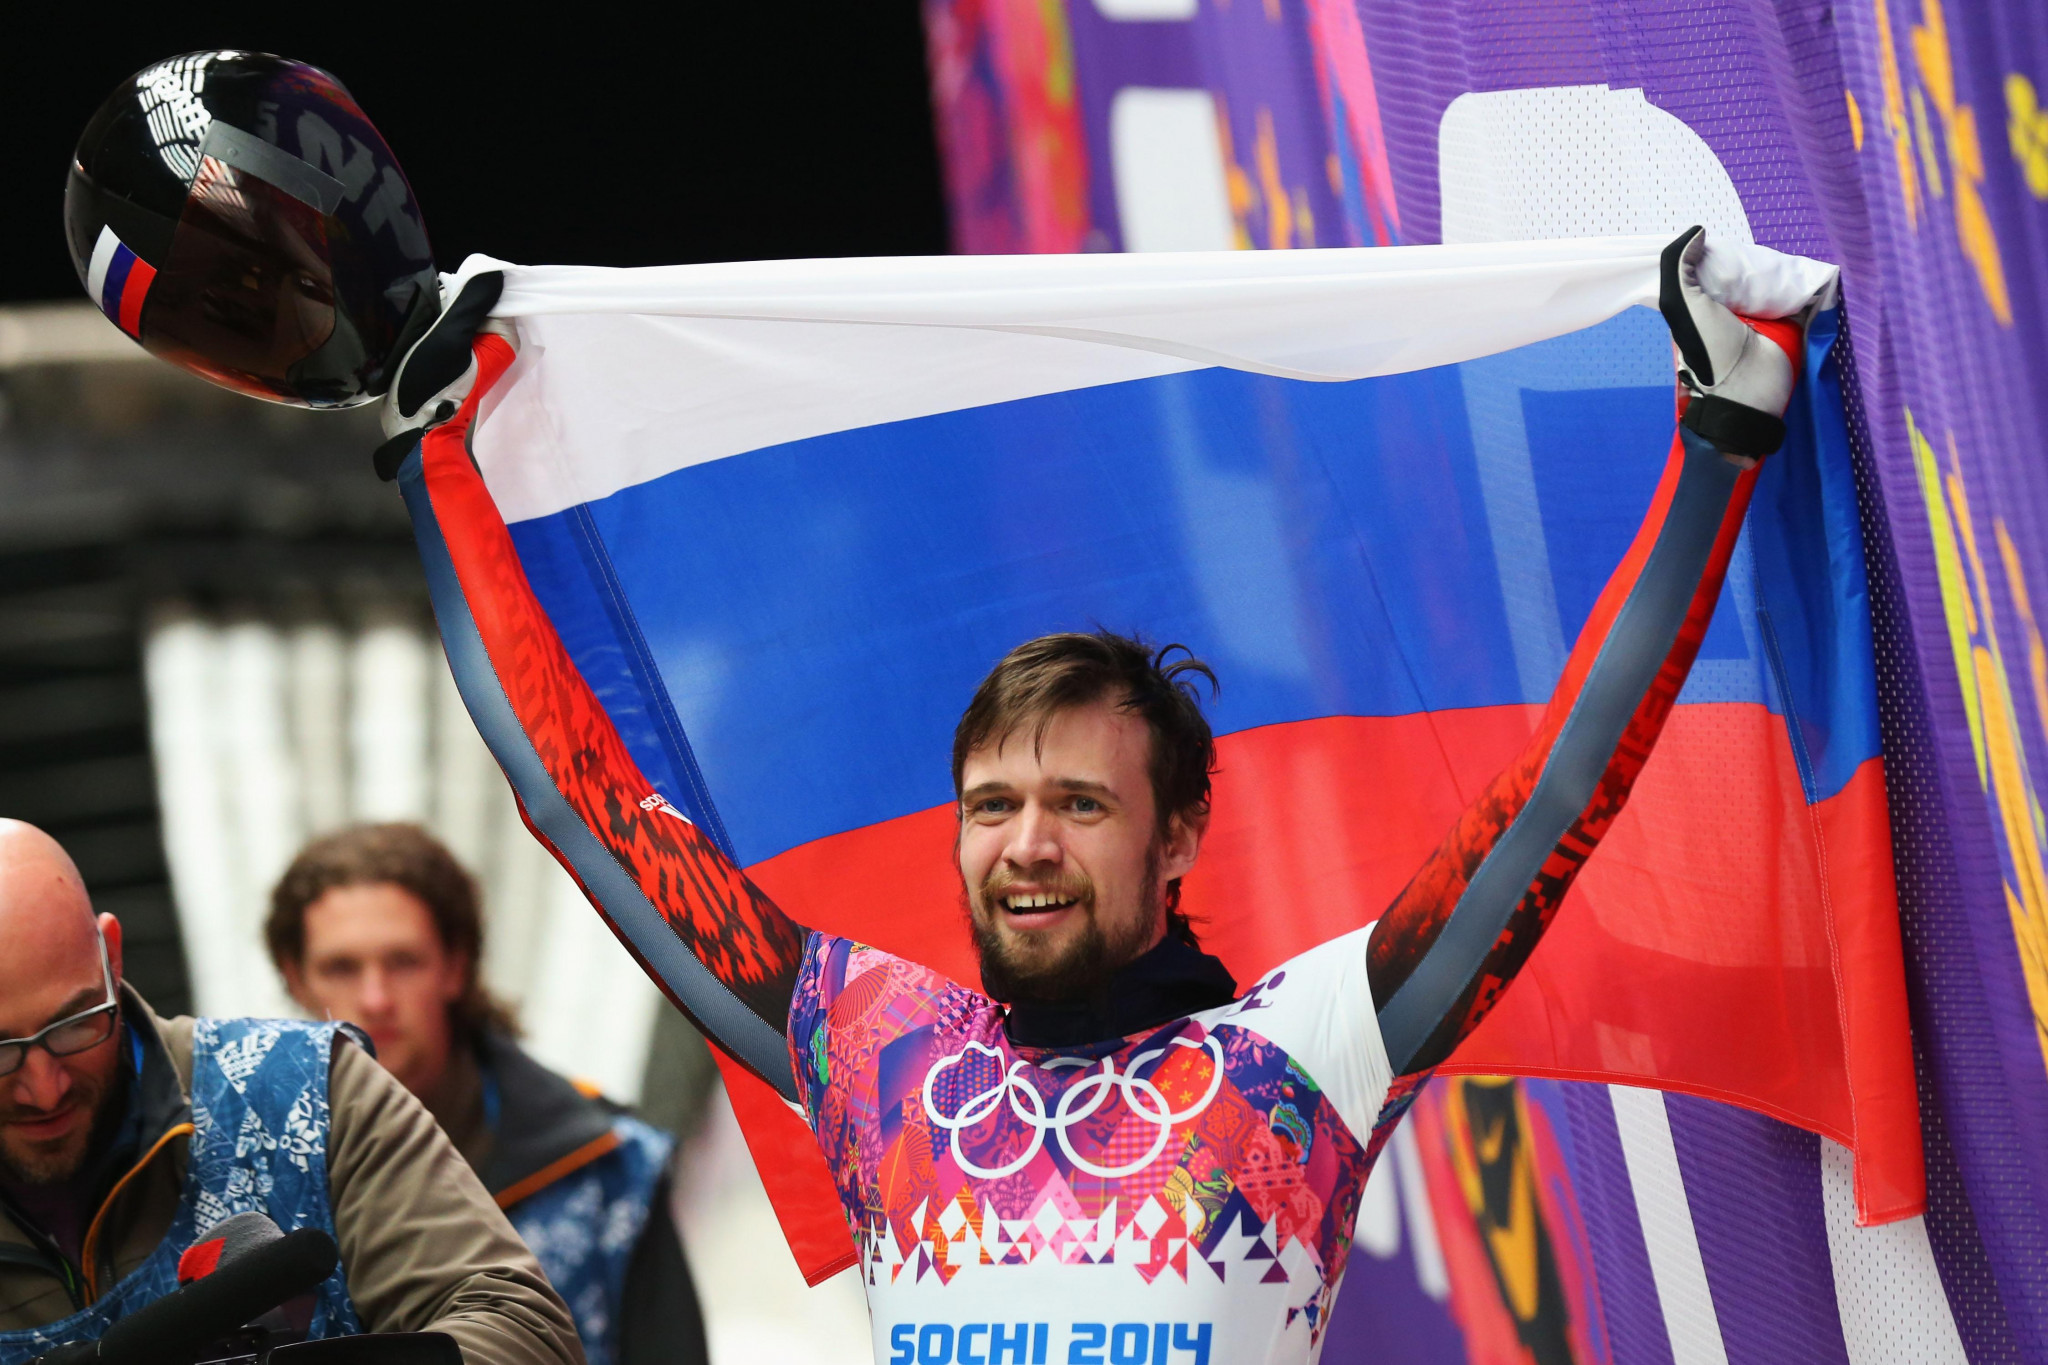 Sochi 2014 skeleton gold medallist Alexander Tretiakov is among the athletes to have appealed to CAS to be allowed to come to Pyeongchang 2018 ©Getty Images